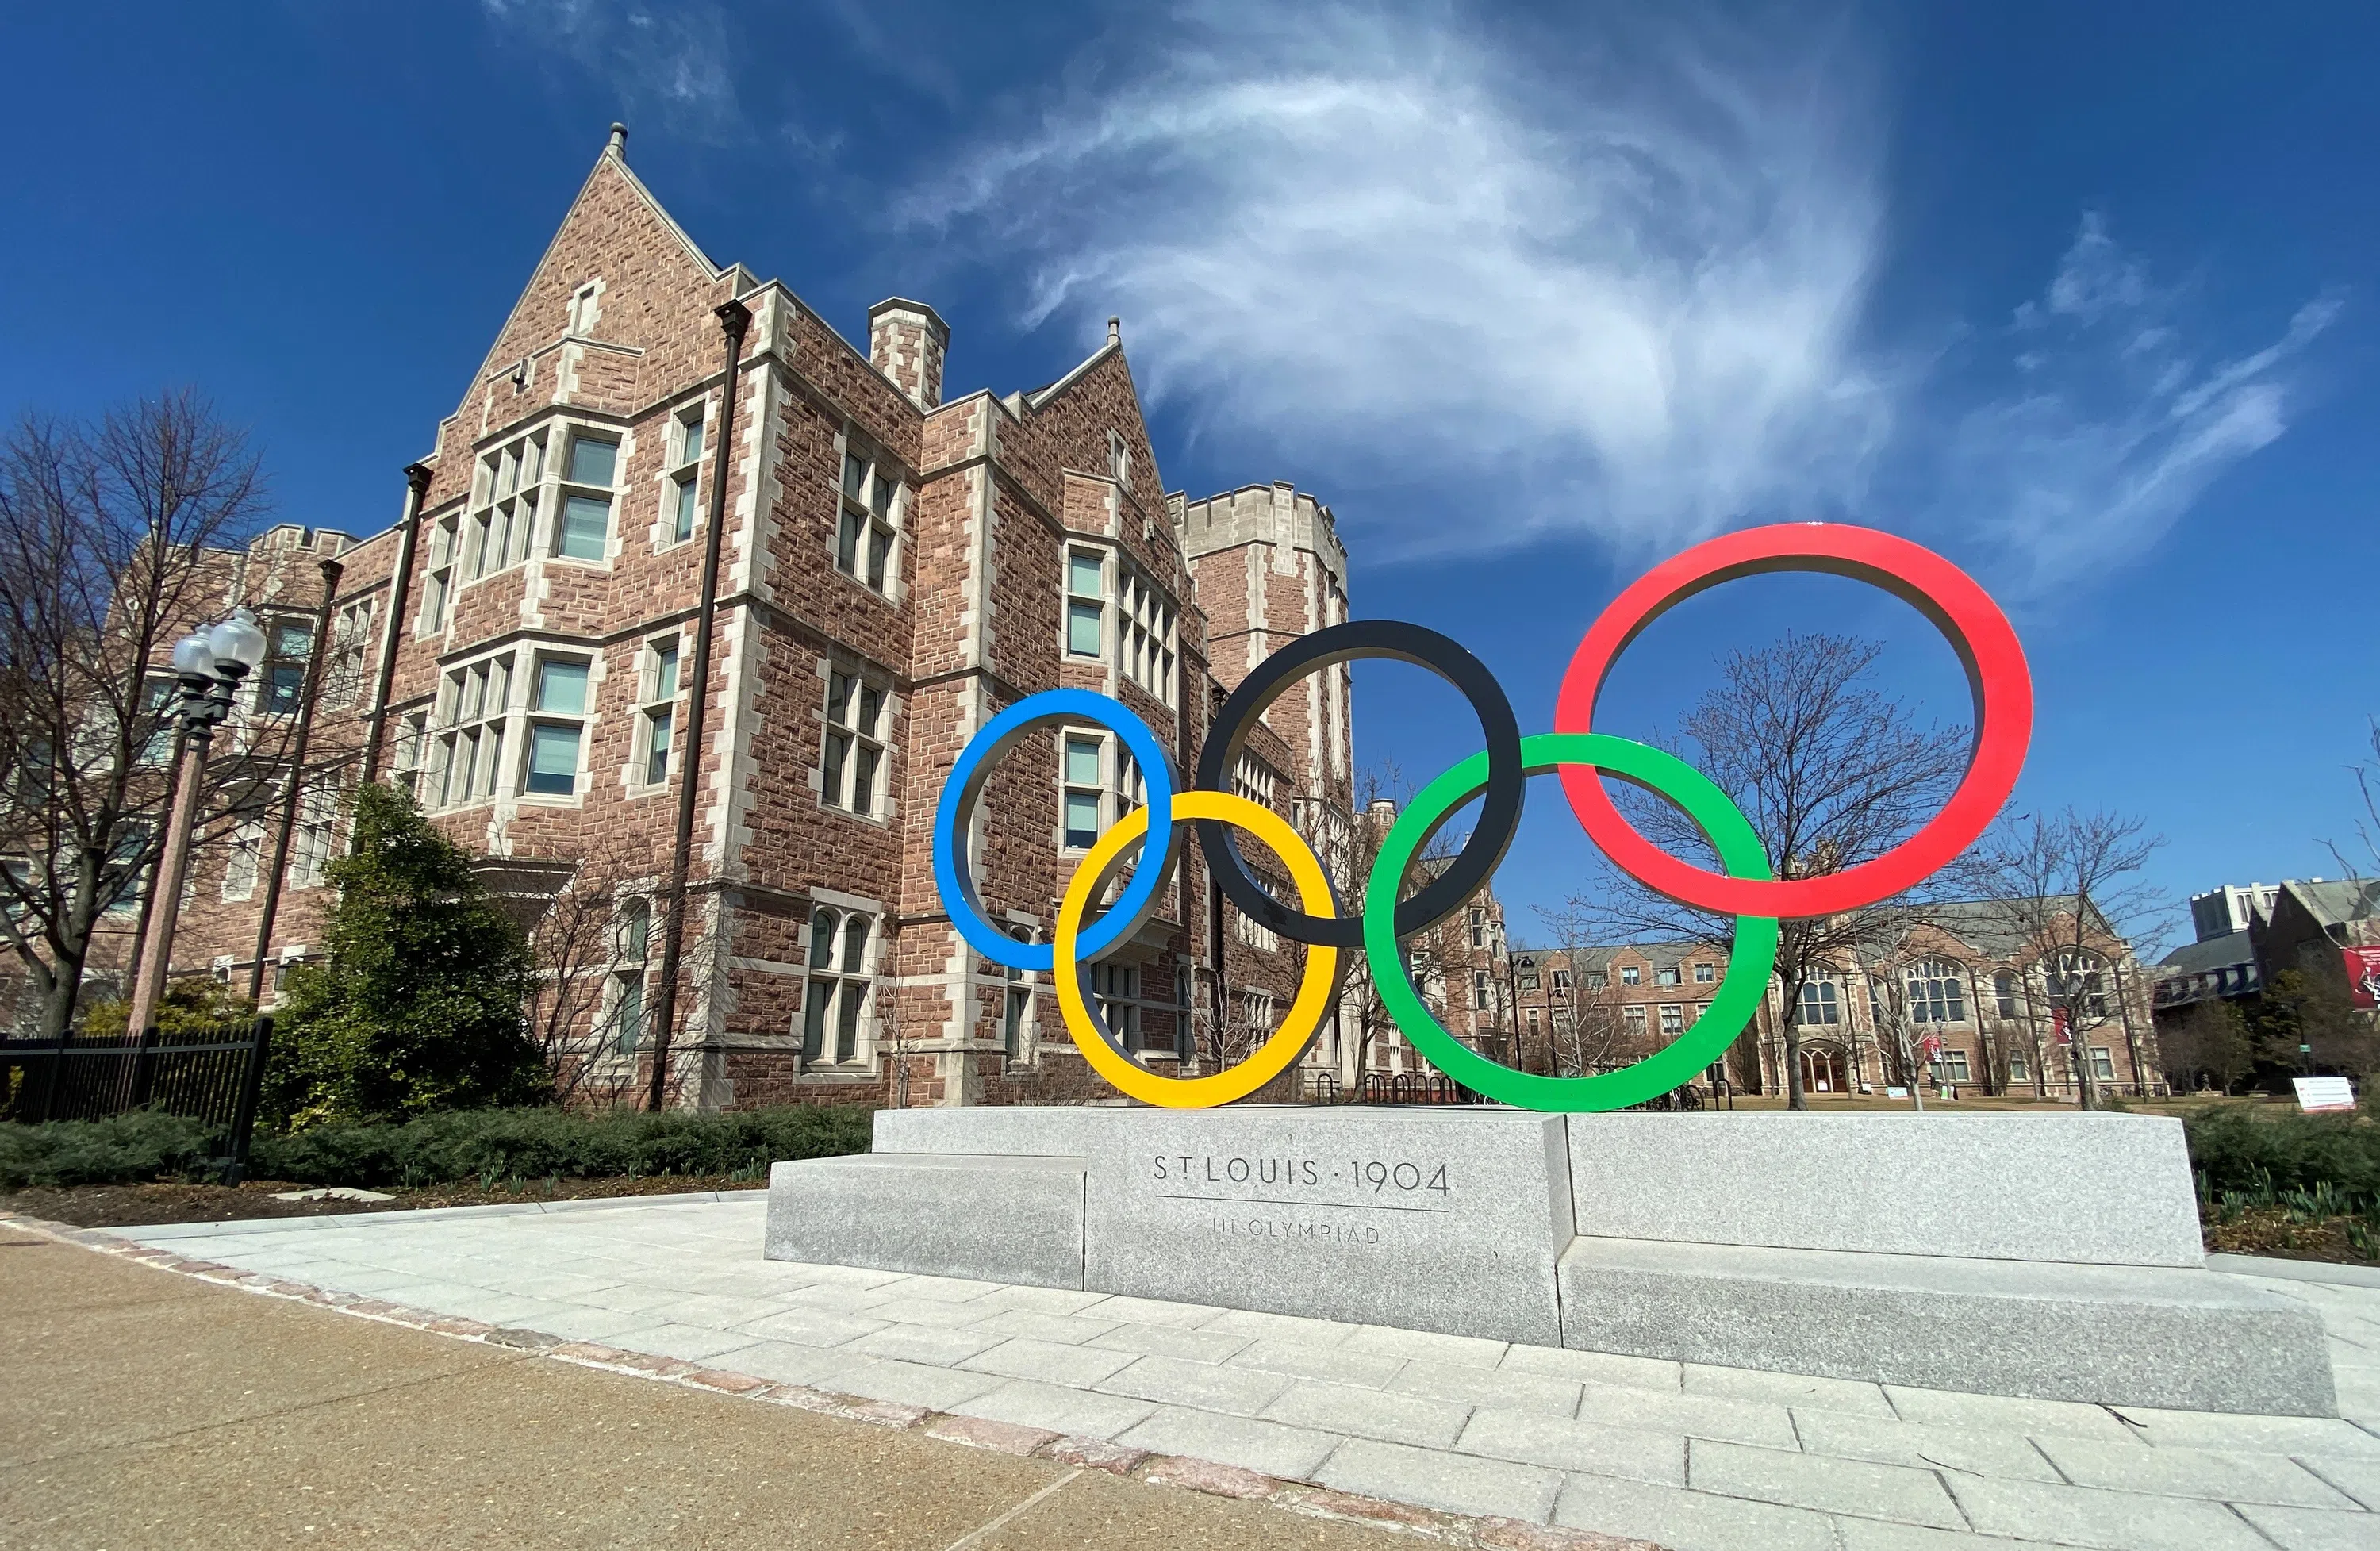 A photo of the Olympic Rings